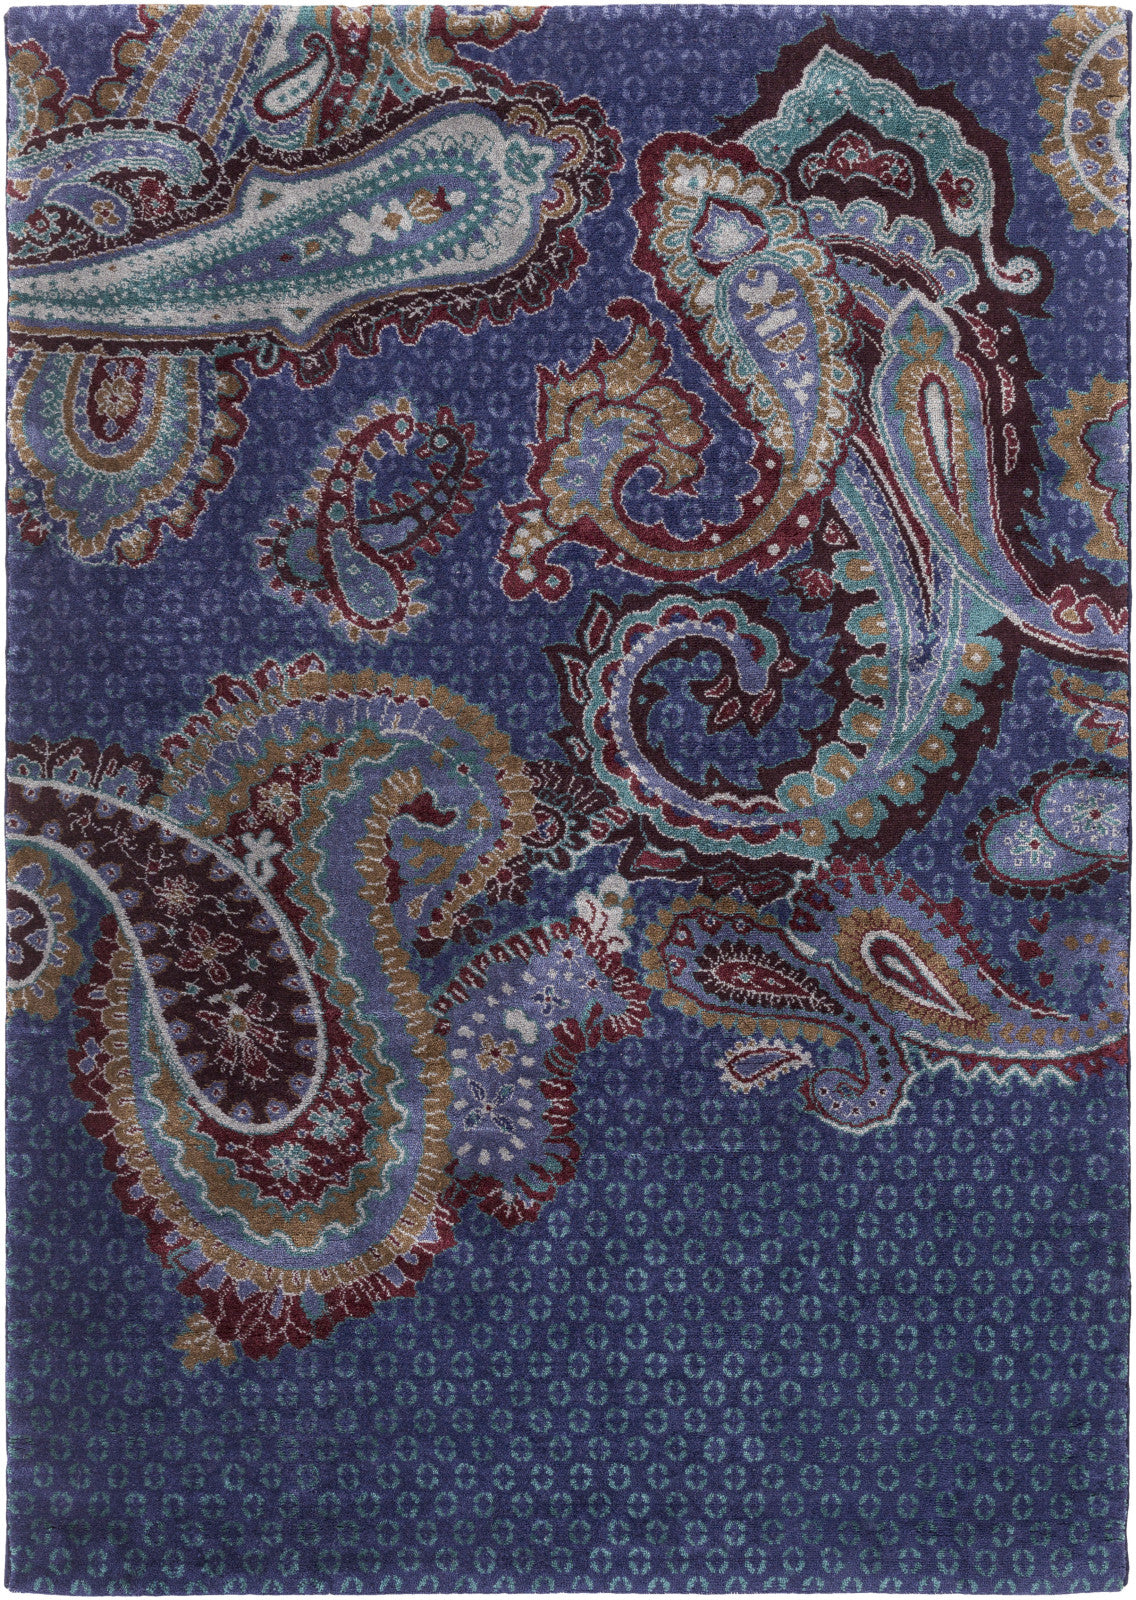 Surya PaisGeo PSG-1000 Blue Area Rug by Ted Baker